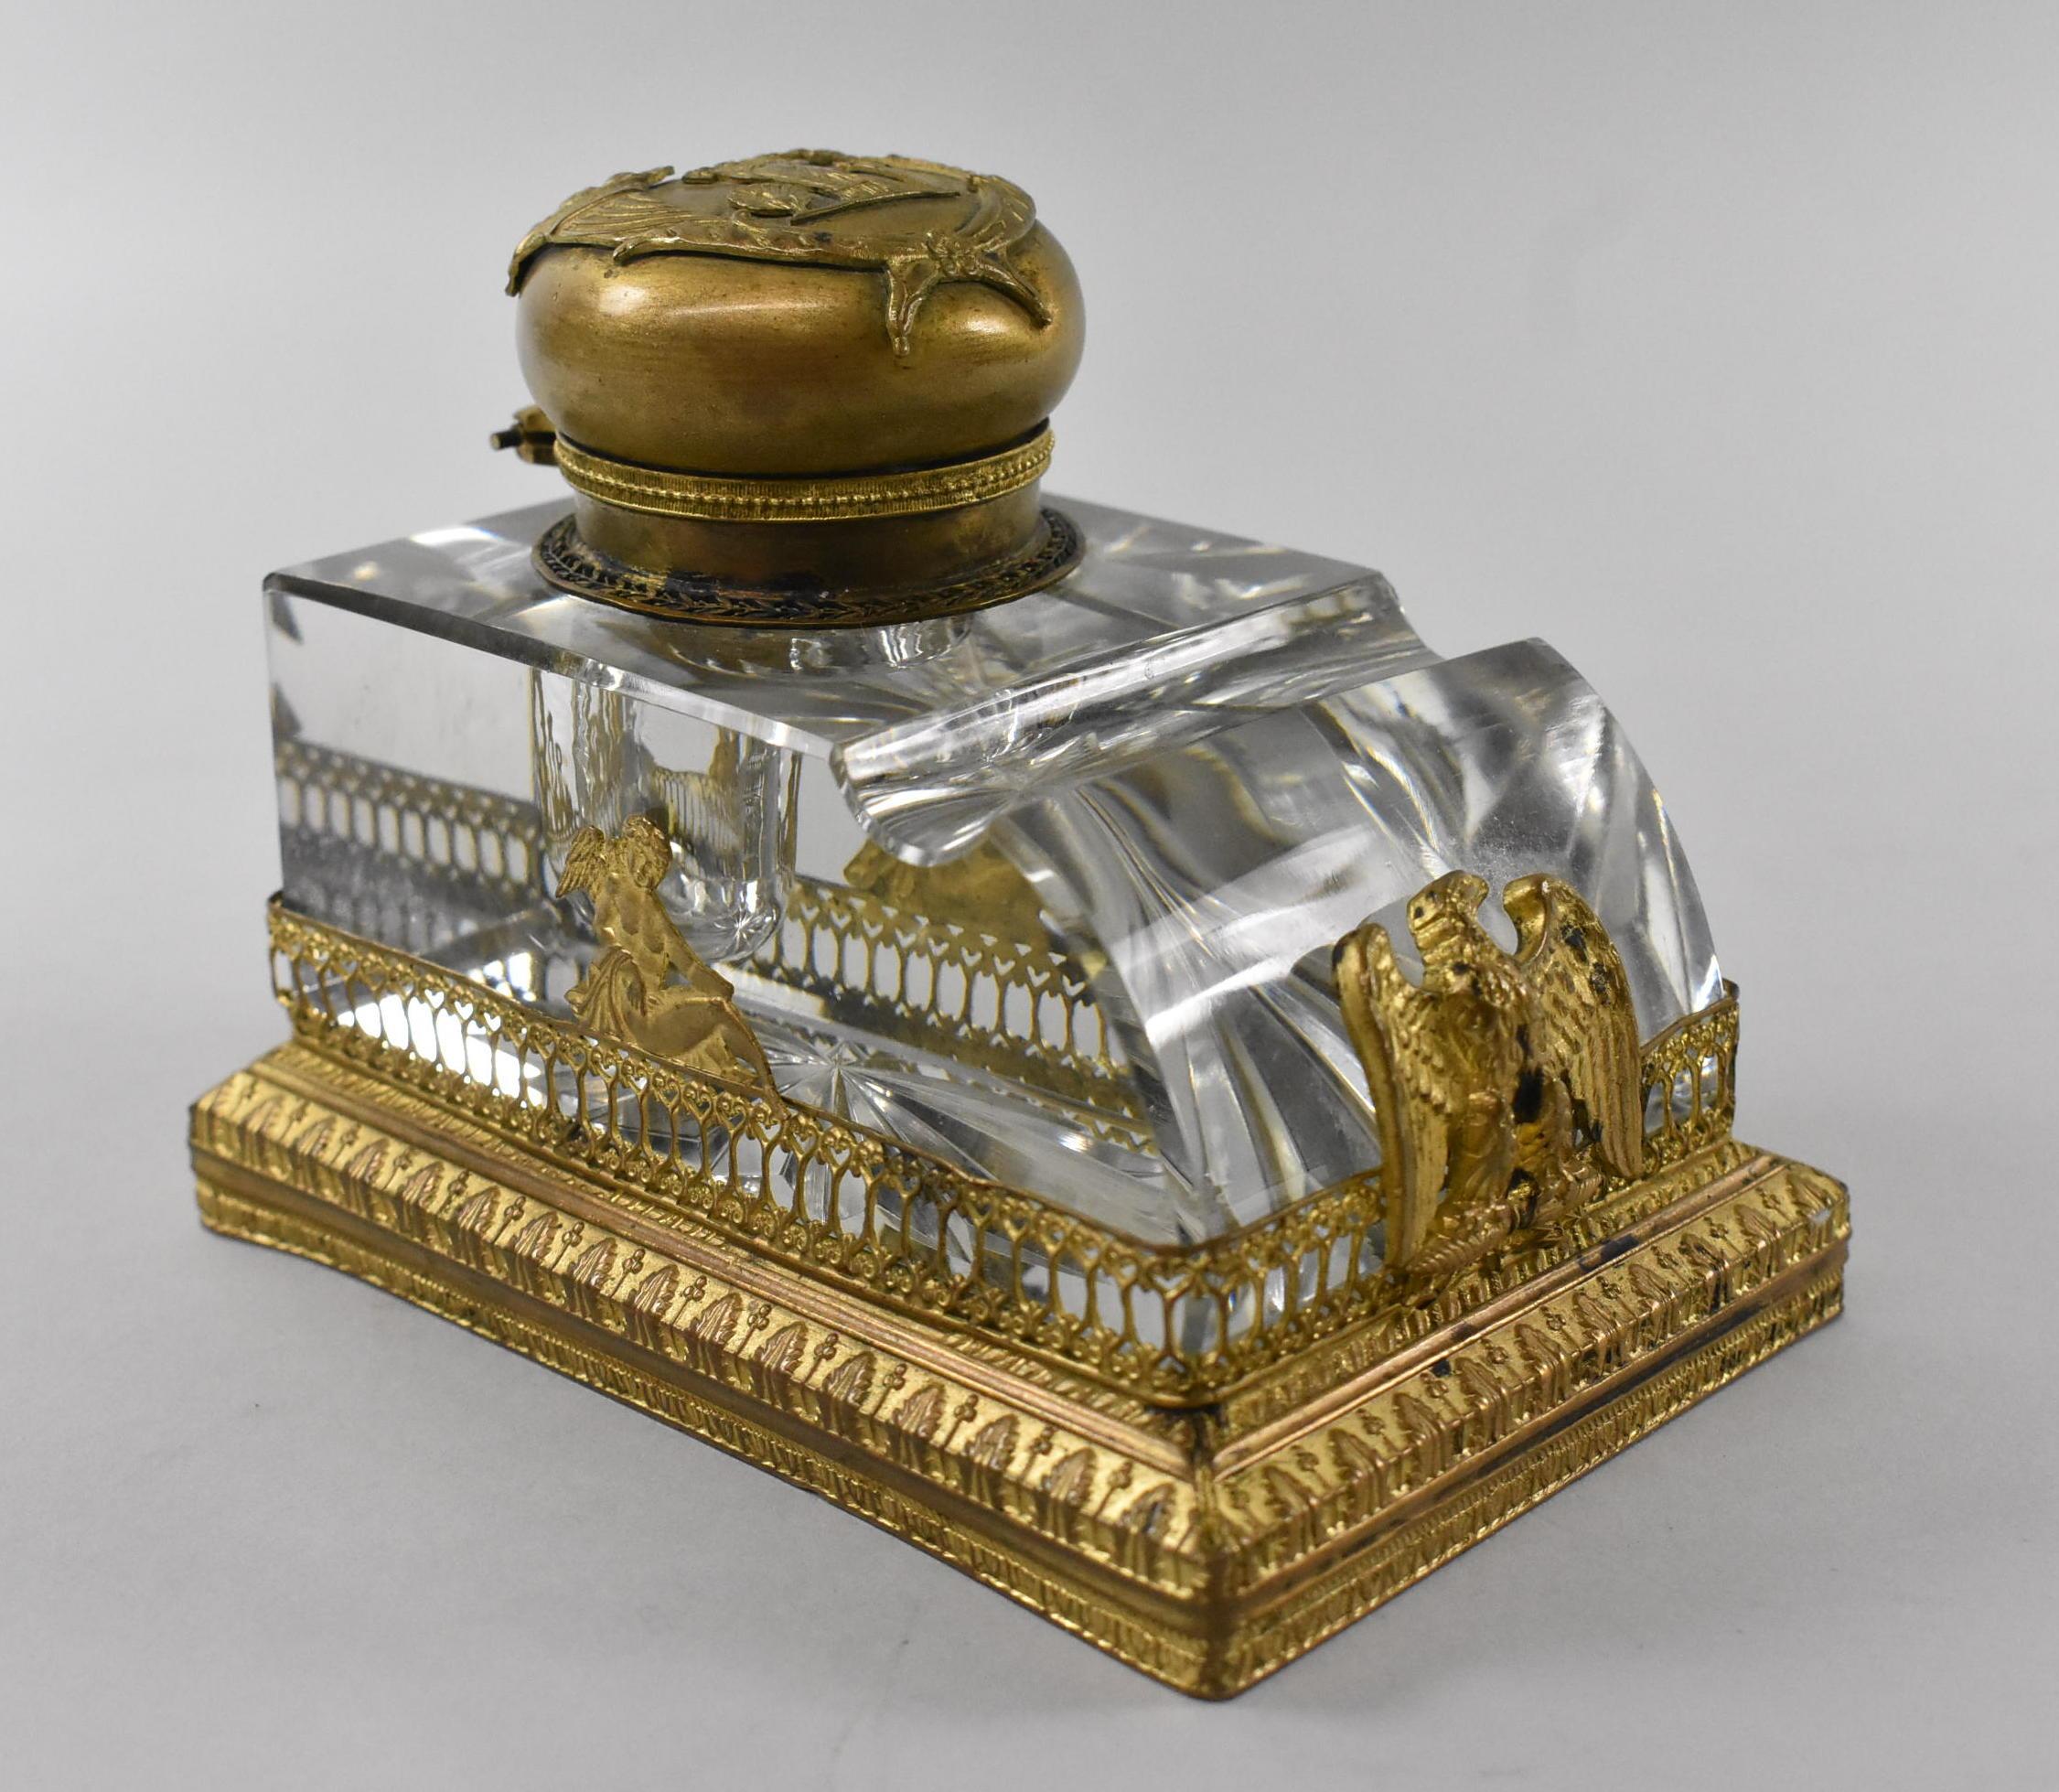 Cut glass inkwell with cut pen rest. Set in a frame of gilded gold with reliefs of eagle, cupid and wreath. Inkwell lid depicts goddess Hera holding a basket and standing next to a peacock and torch. Very good condition. Light tarnish on gold.